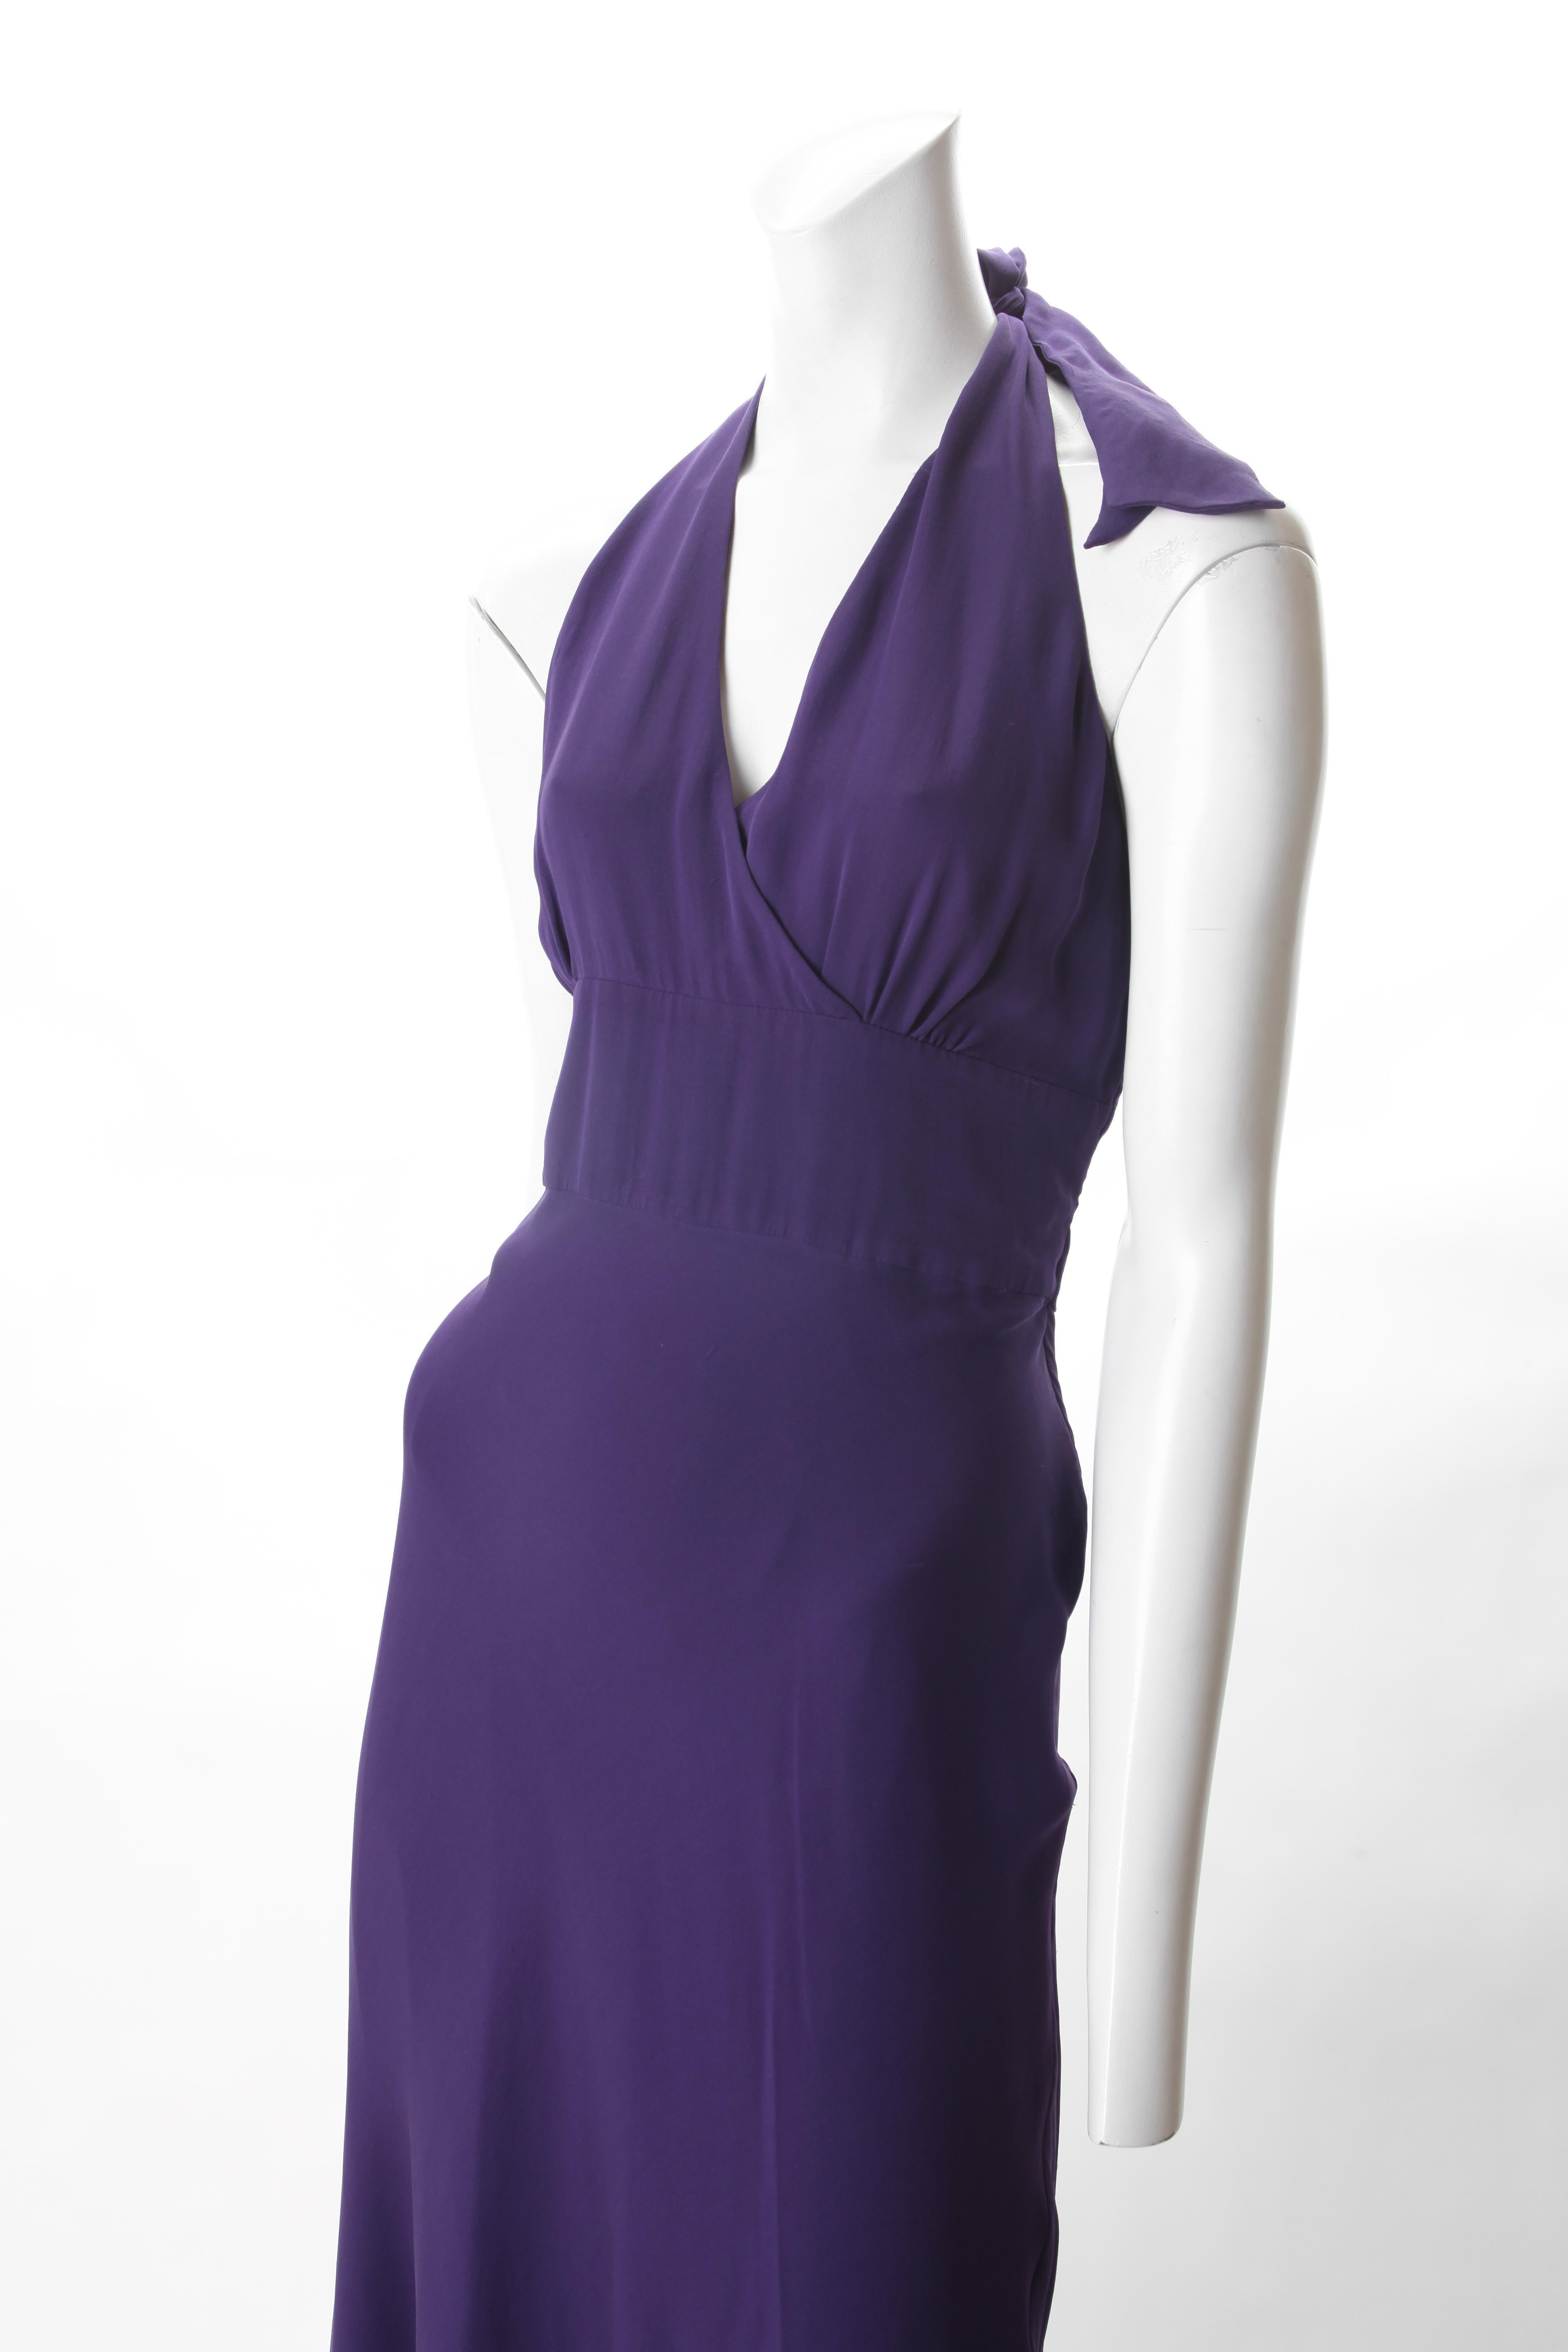 Halston Purple Chiffon Halter Dress, c.1970s.
Halston layered chiffon purple halter dress with empire bodice and handkerchief skirt. Low cut back with hidden side zipper closure and tie at neck.

Fits US Size 8.